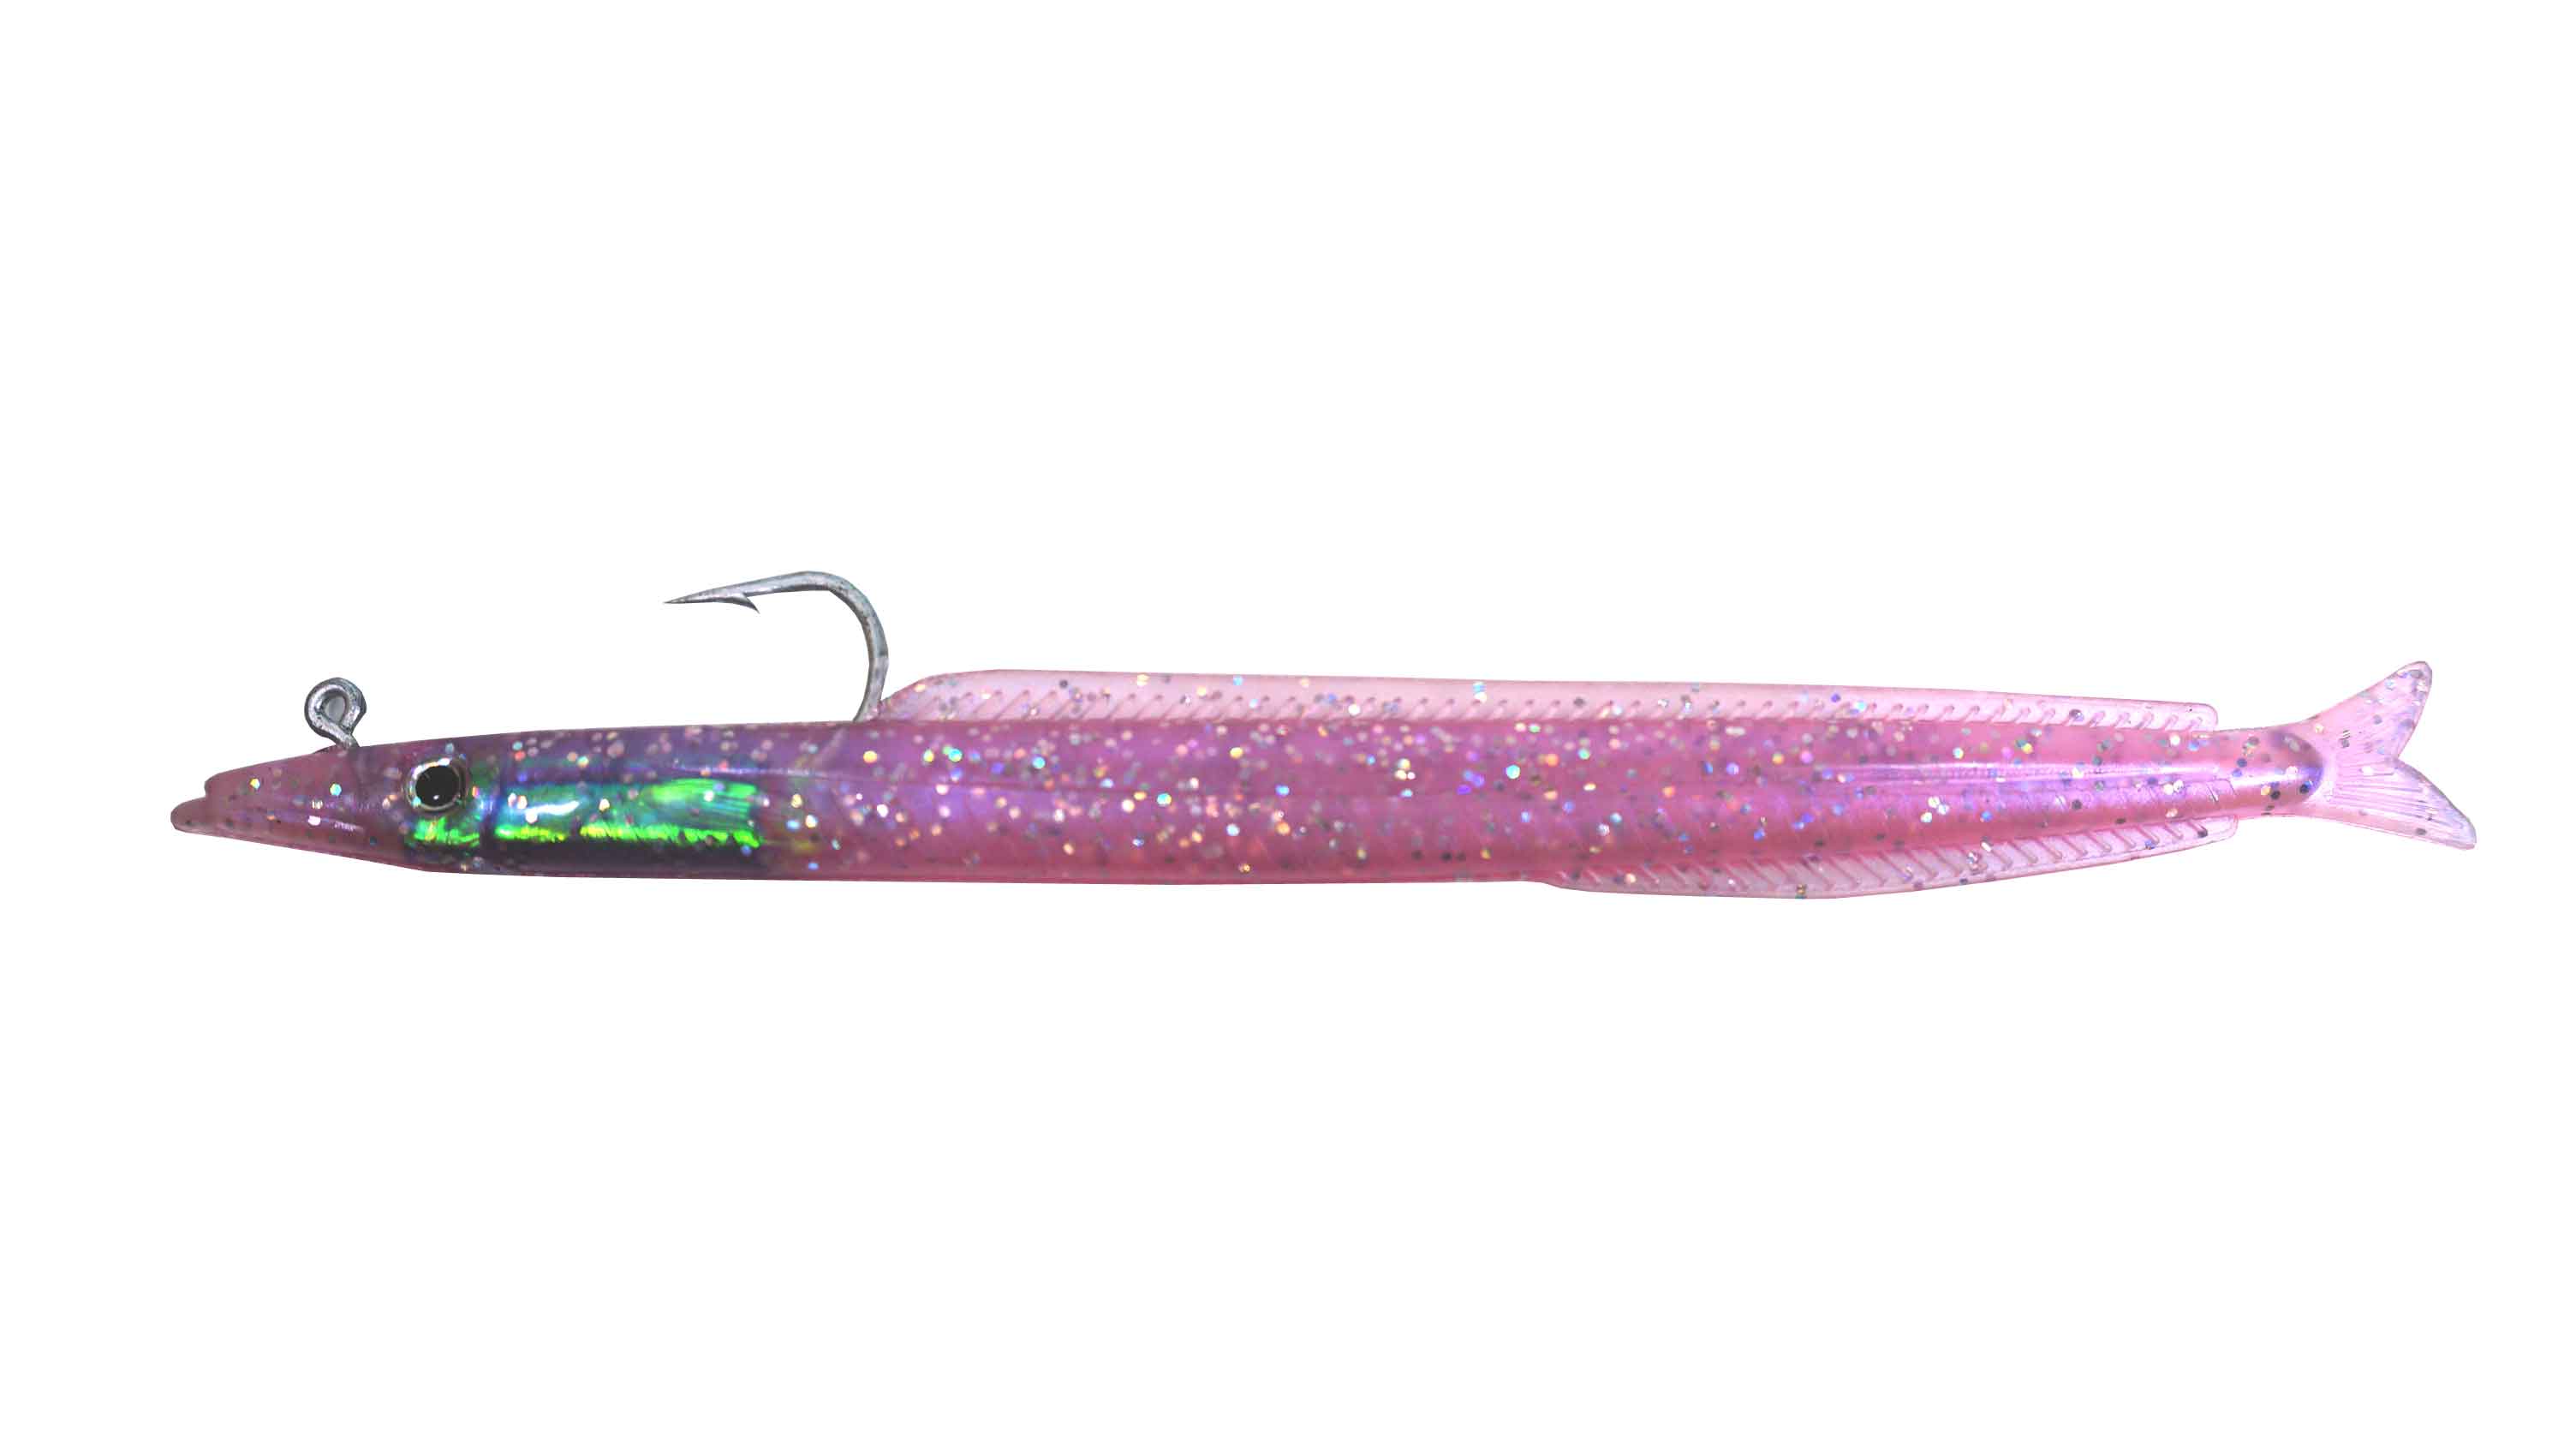 Almost Alive 5 Soft Sand Eel Lure Purple Flake Rigged [AASL614H] - $1.59 :  ebasicpower.com, Marine Engine Parts, Fishing Tackle